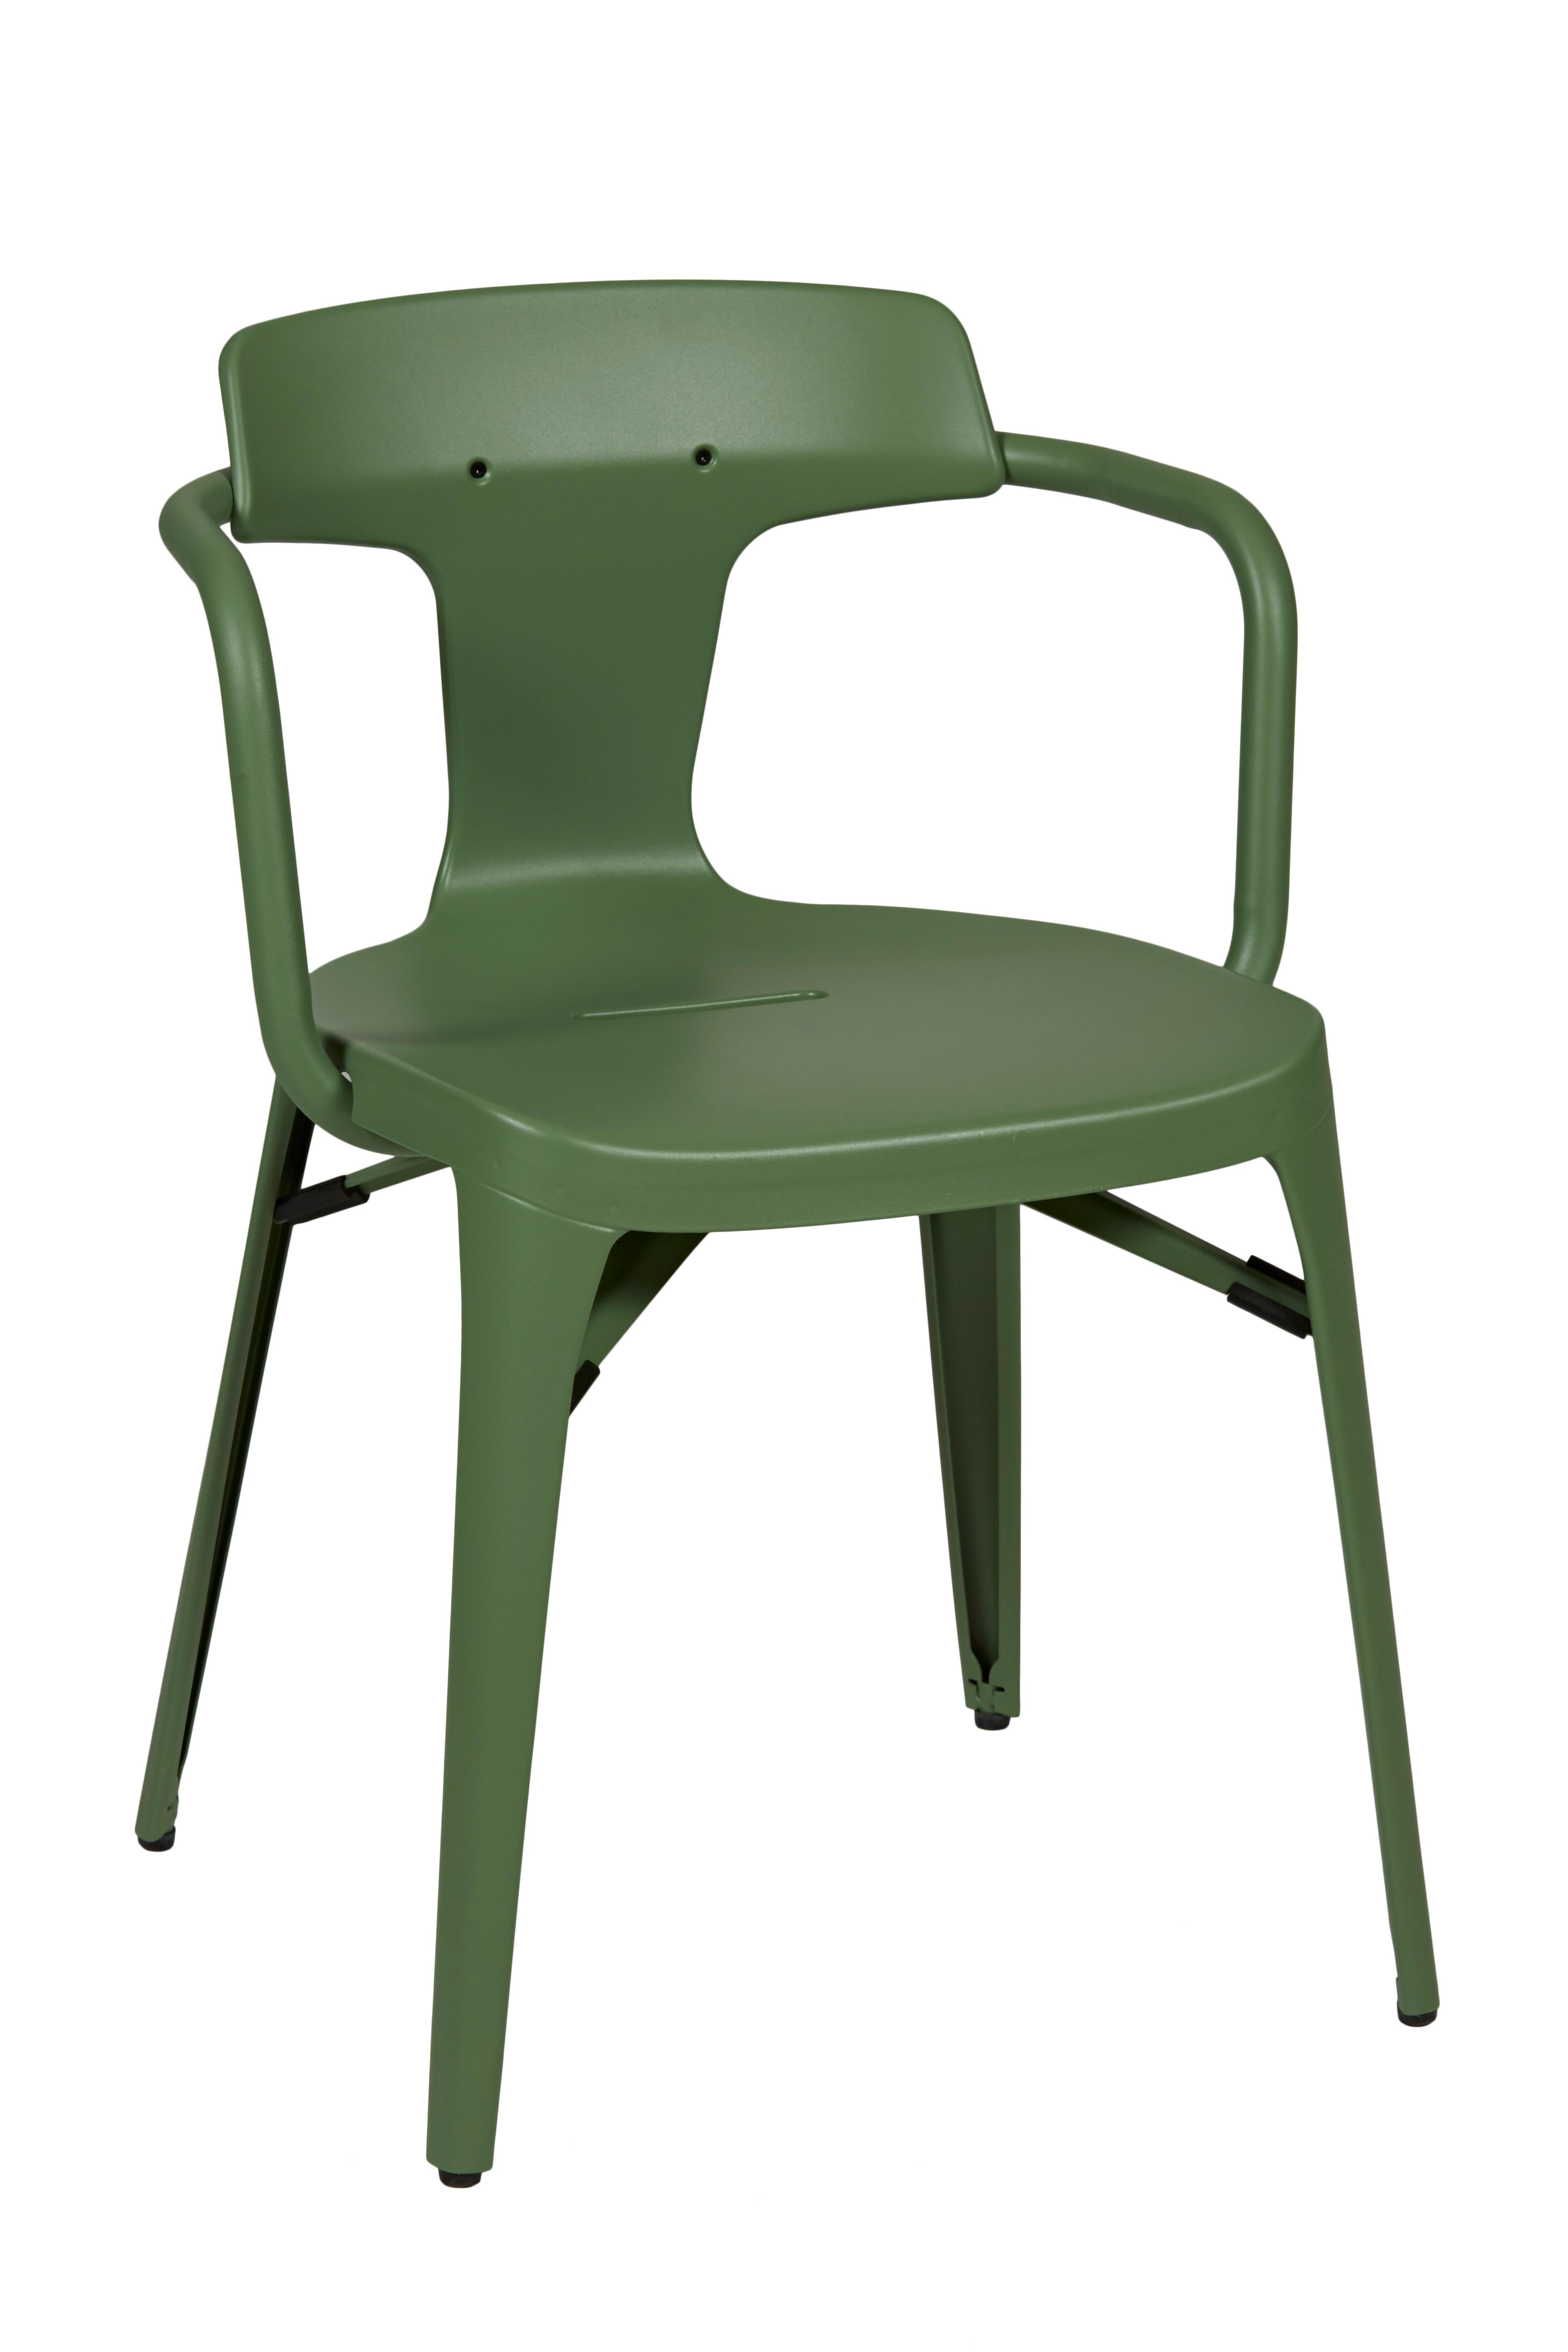 Im Angebot: T14 Chair in Pop Colors by Patrick Norguet and Tolix, Green (Romarin) 3